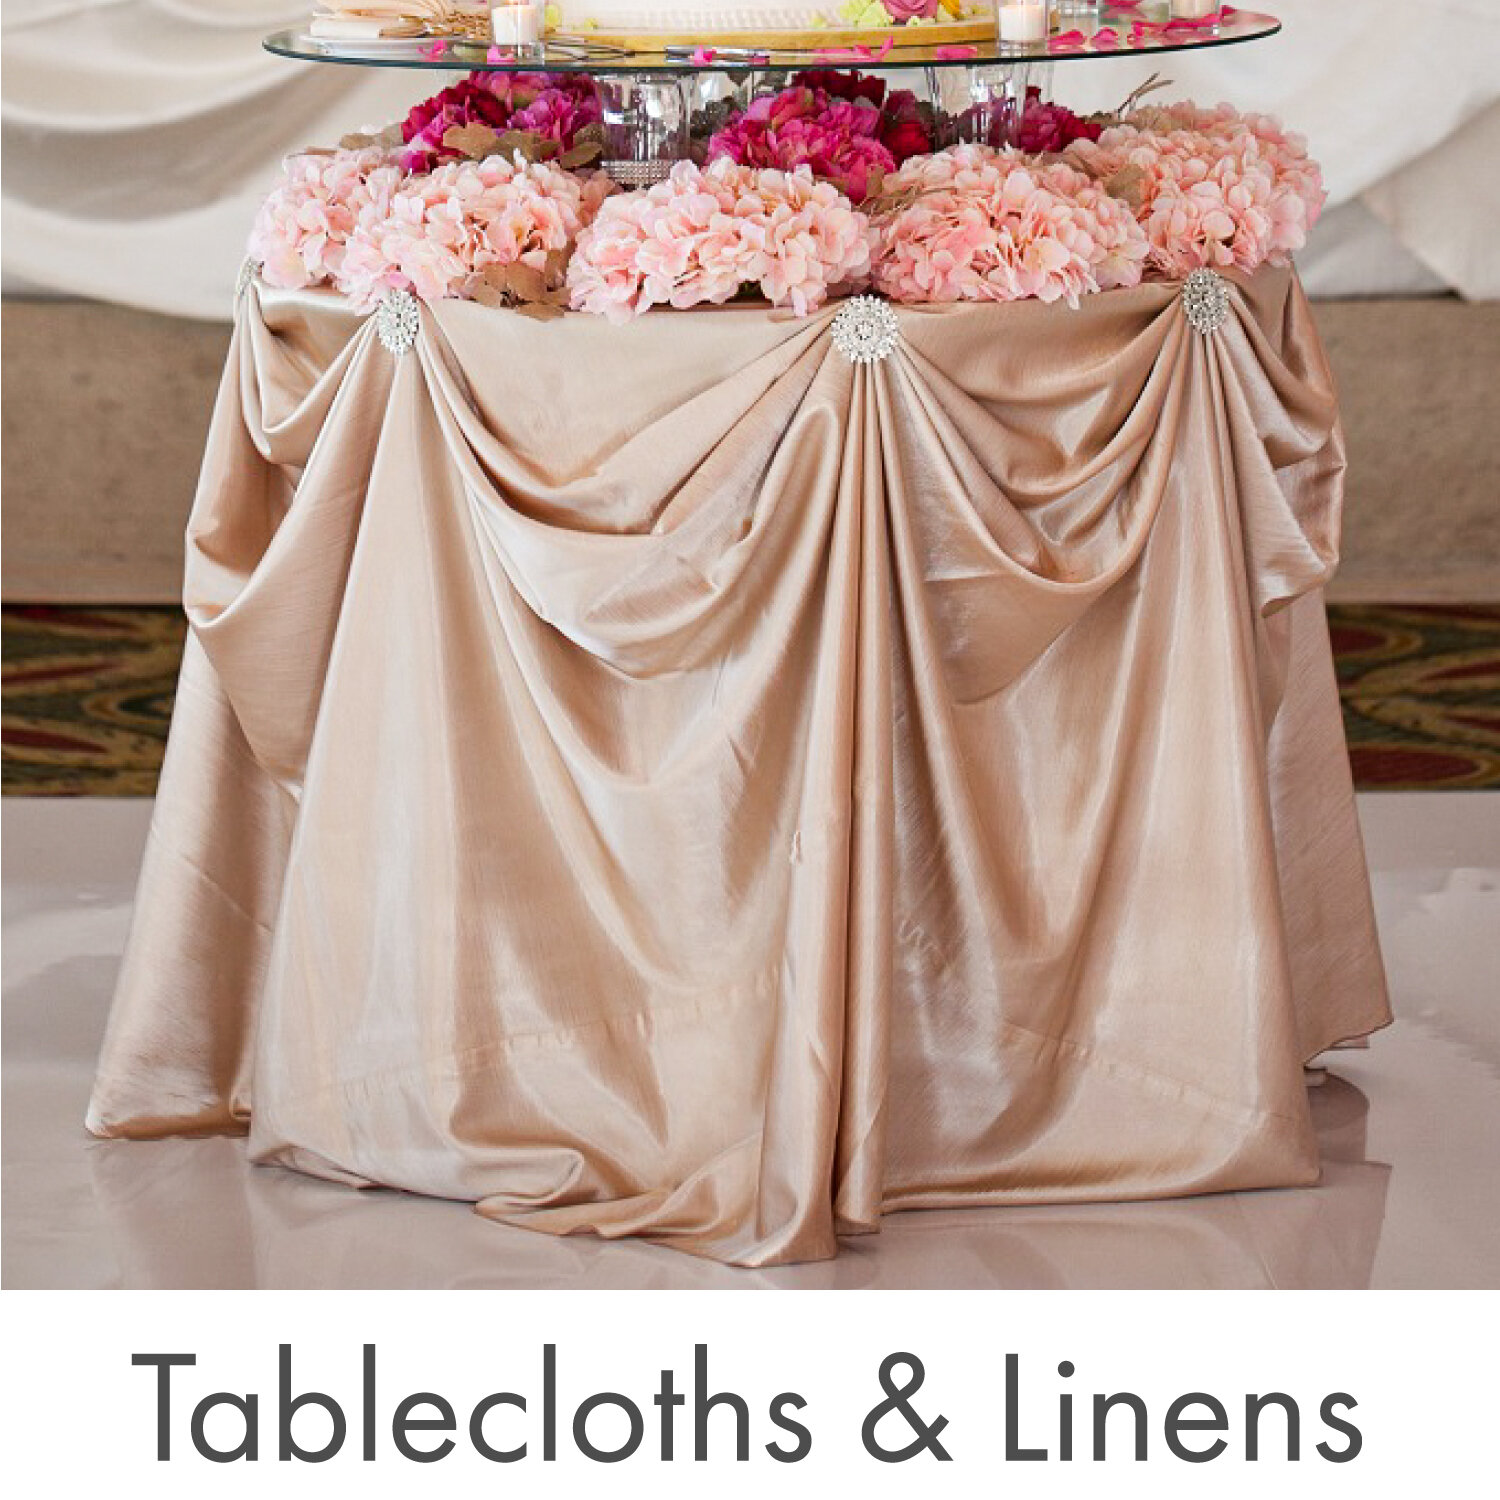 Category-Icons-Tablecloths+Linens.jpg